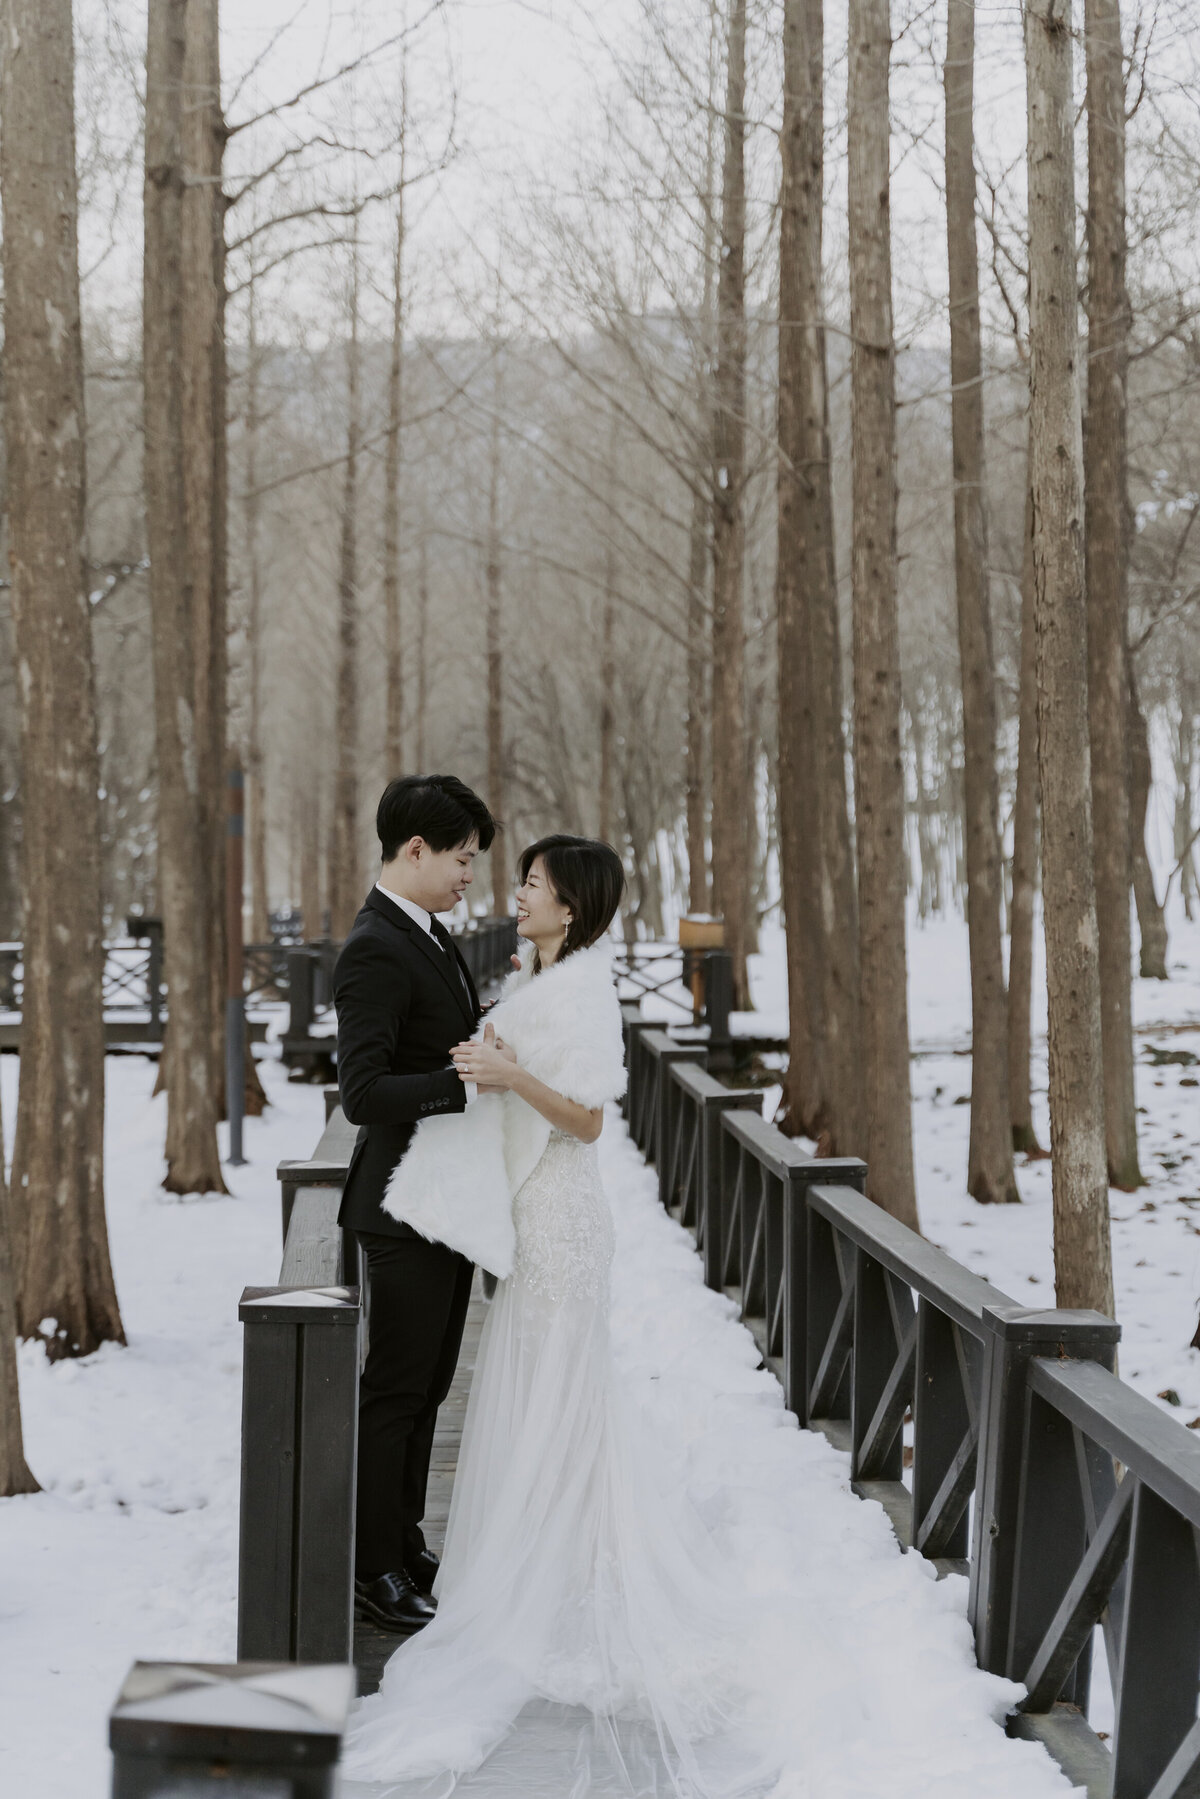 the bride wears a long white gown with white scarf while the groom wears black suit and tie